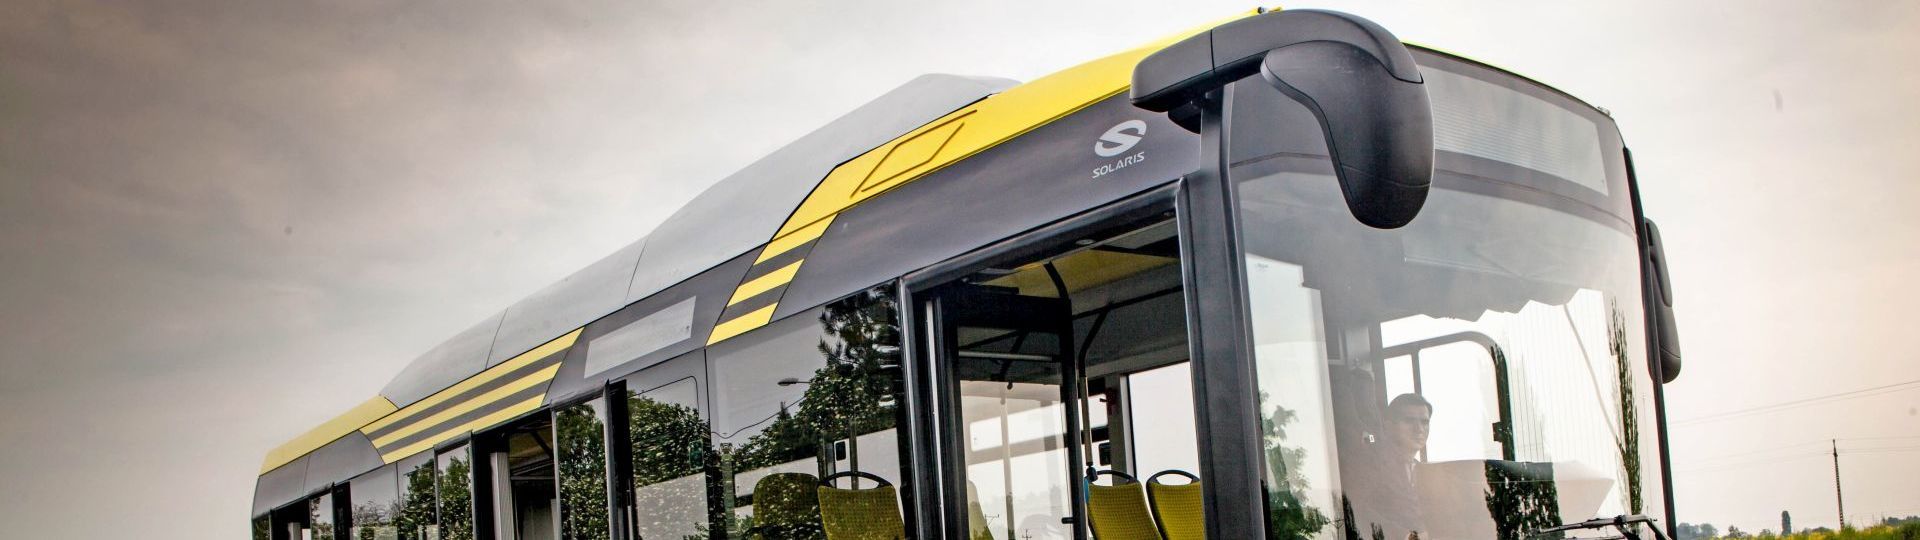 Solaris sums up 2016. New Solaris Urbino electric named Bus of the Year 2017!